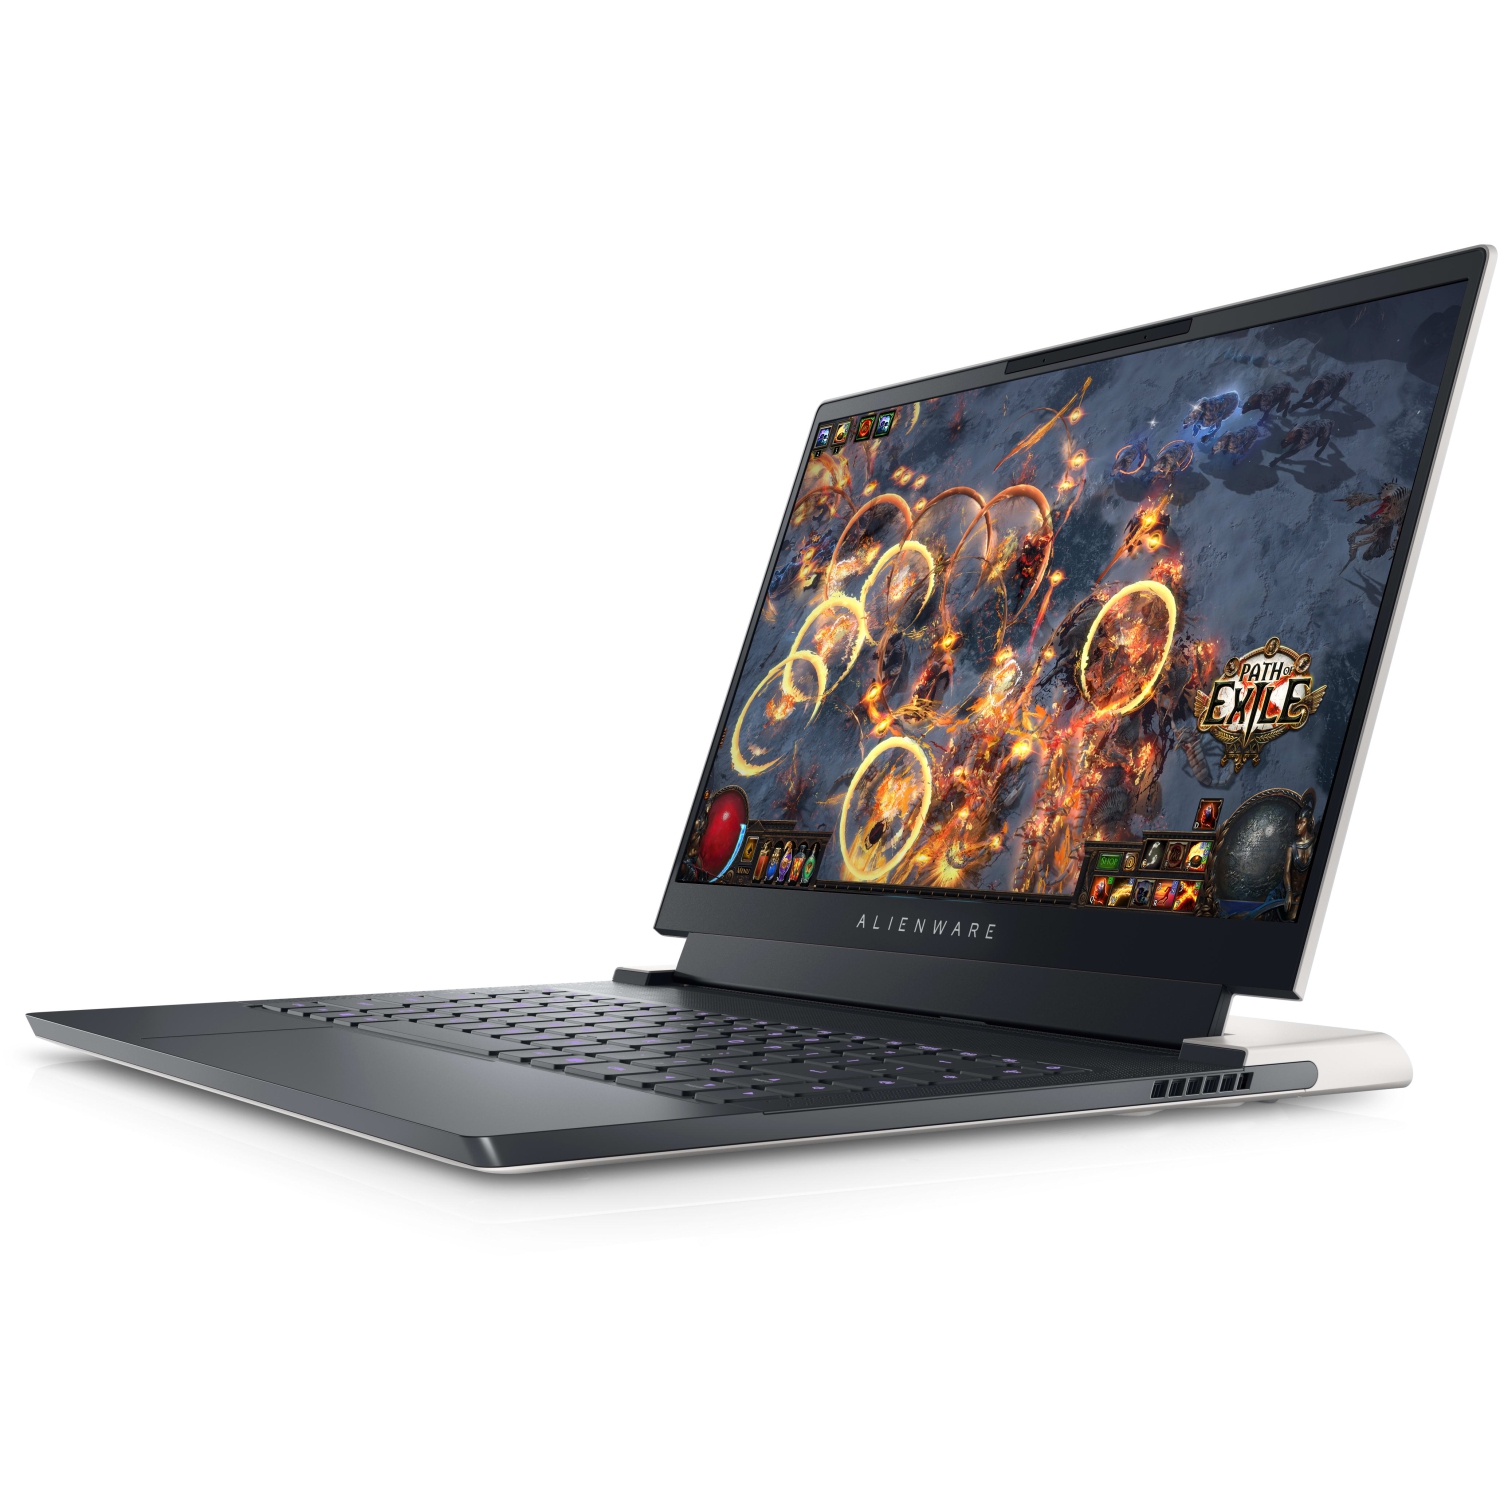 Refurbished (Excellent) – Dell Alienware X14 Gaming Laptop (2022) | 14" FHD | Core i7 - 2TB SSD - 16GB RAM - RTX 3060 | 14 Cores @ 4.7 GHz - 12th Gen CPU - 12GB GDDR6